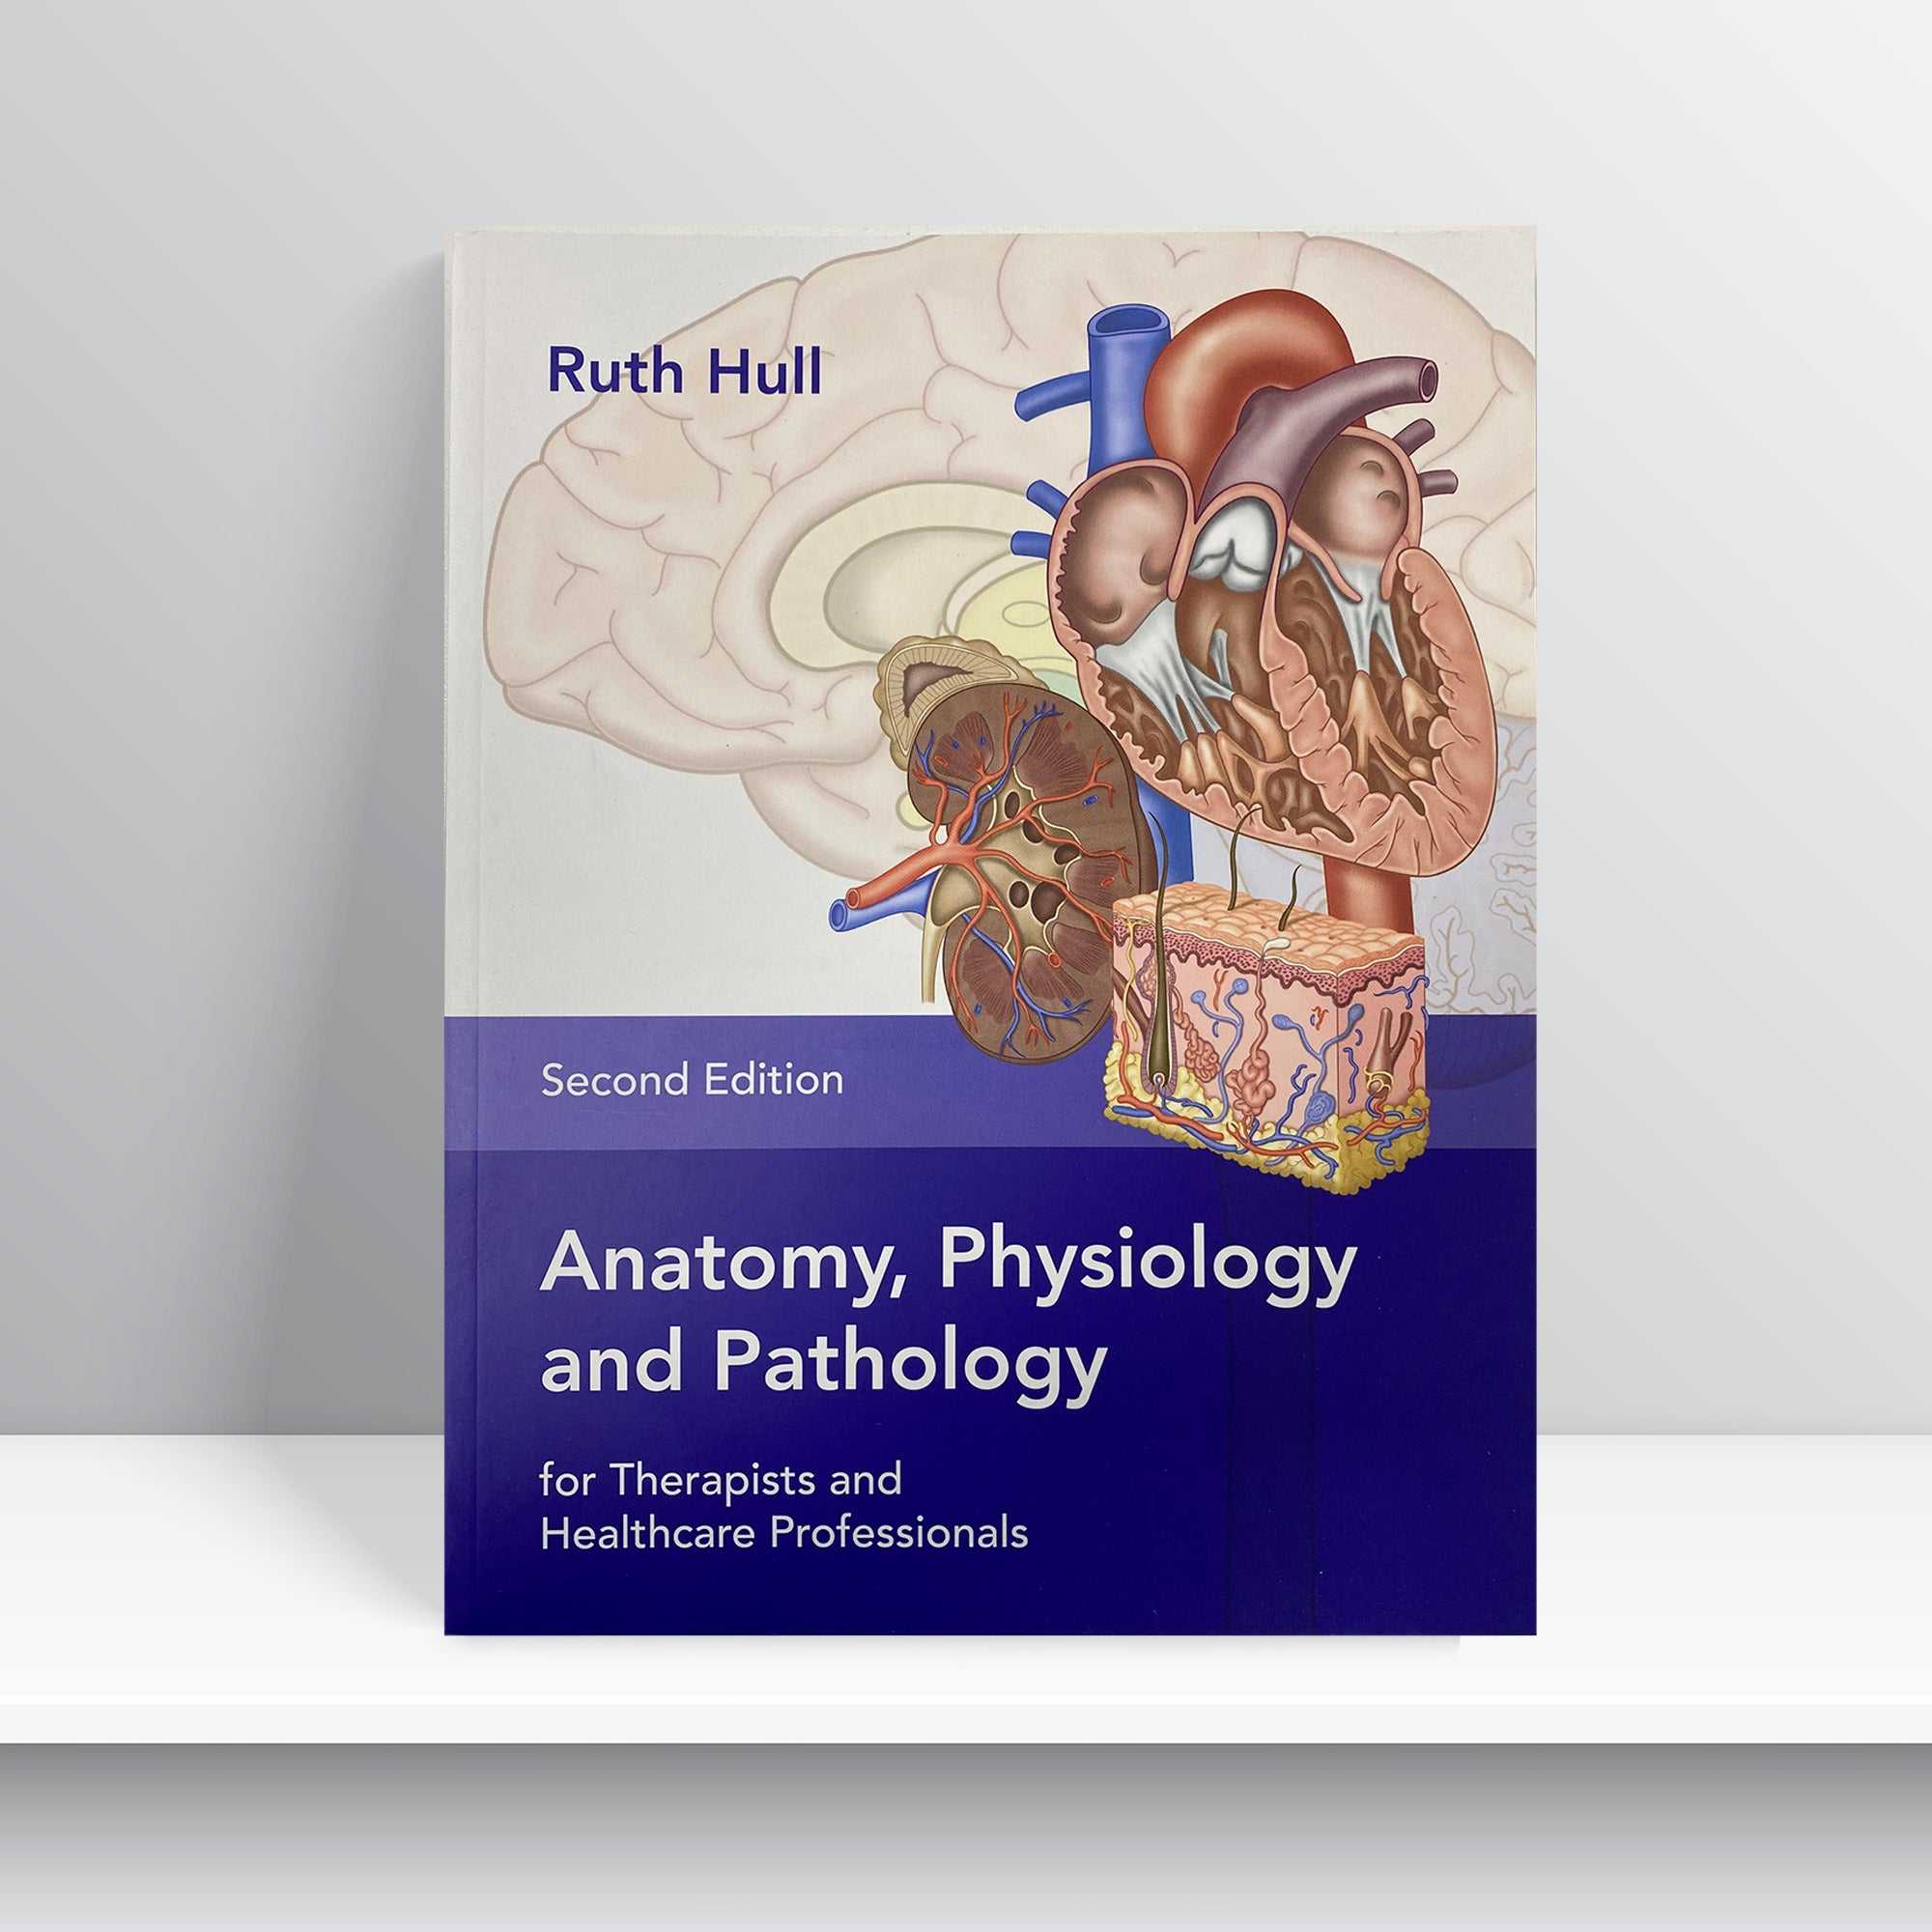 Anatomy, Physiology & Pathology for Therapists & Healthcare Professionals